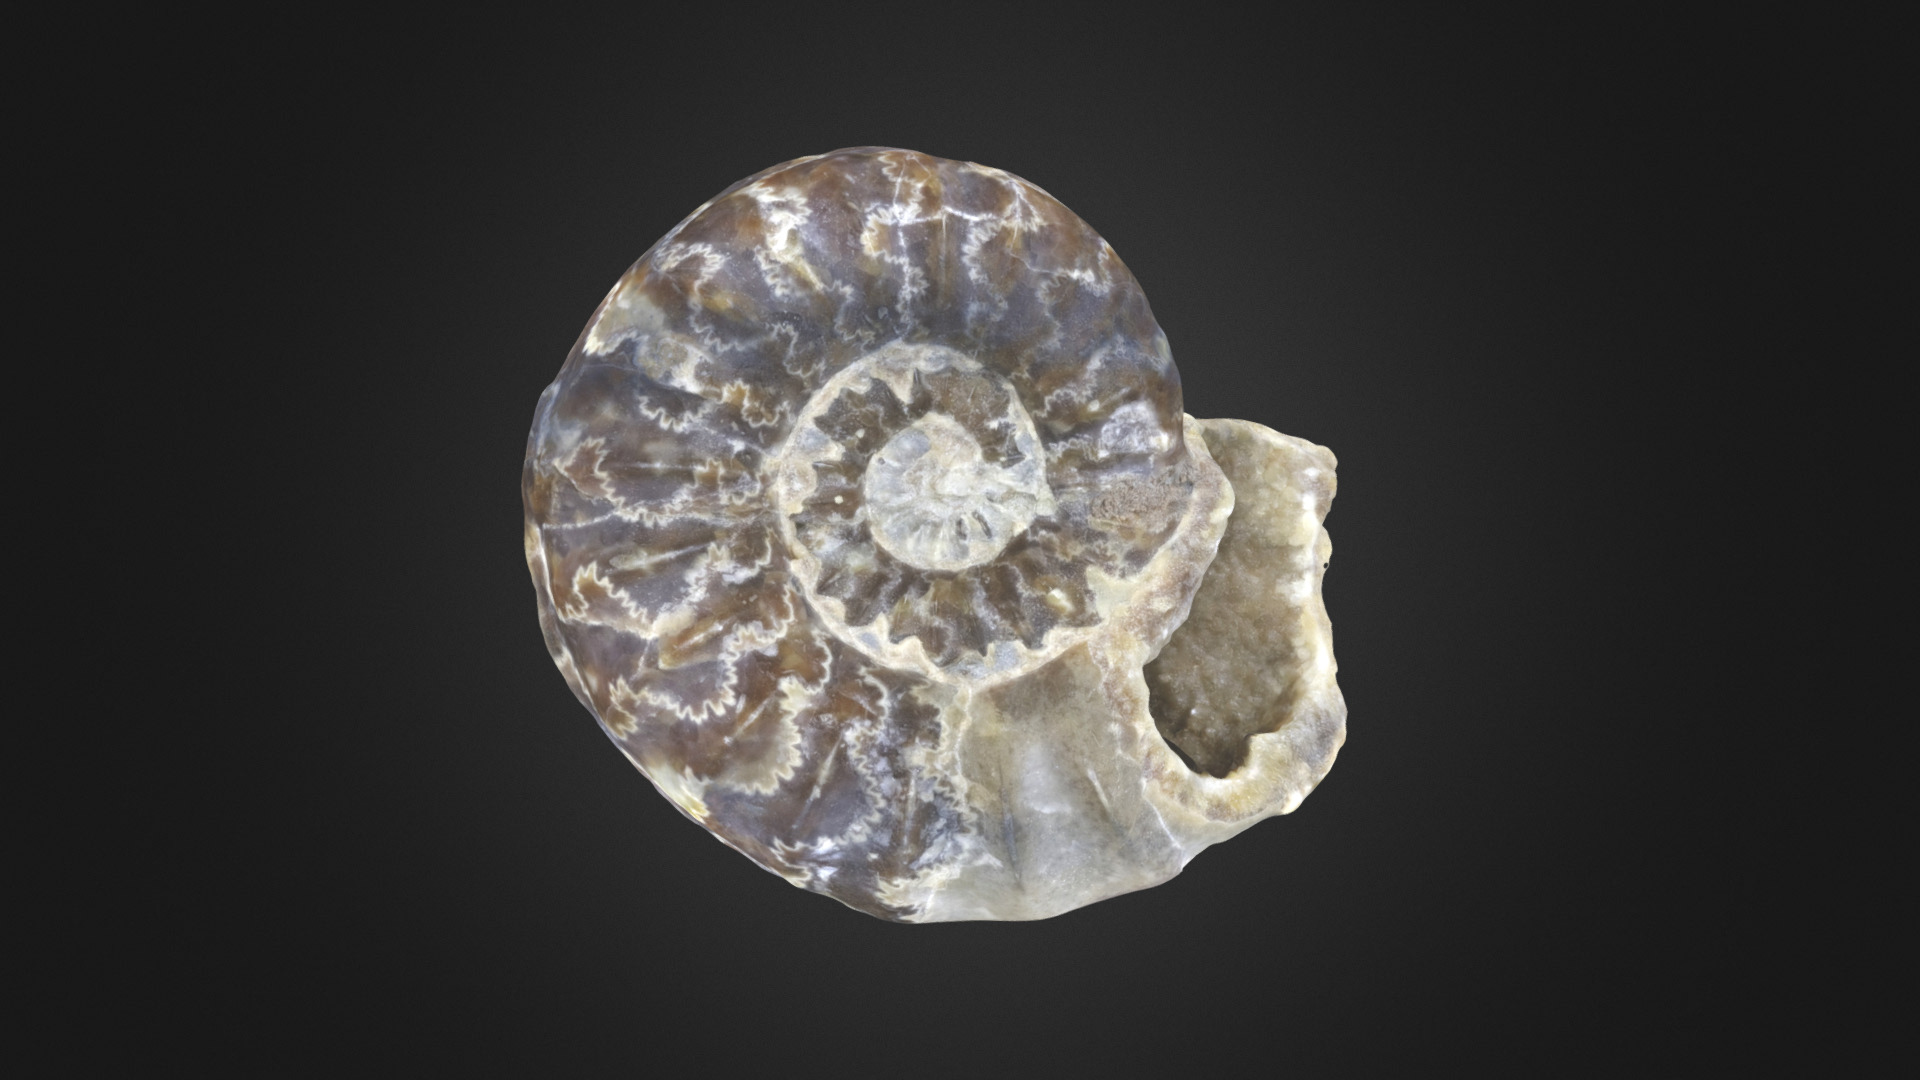 Fossil ammonoid Asteroceras obtusum from the Jurassic of England (PRI 43873); specimen exhibits ammonite sutures. Specimen is on display at the Museum of the Earth, Ithaca, New York. Maximum diameter of specimen is approximately 8.5 cm. Model by Emily Hauf 3d model